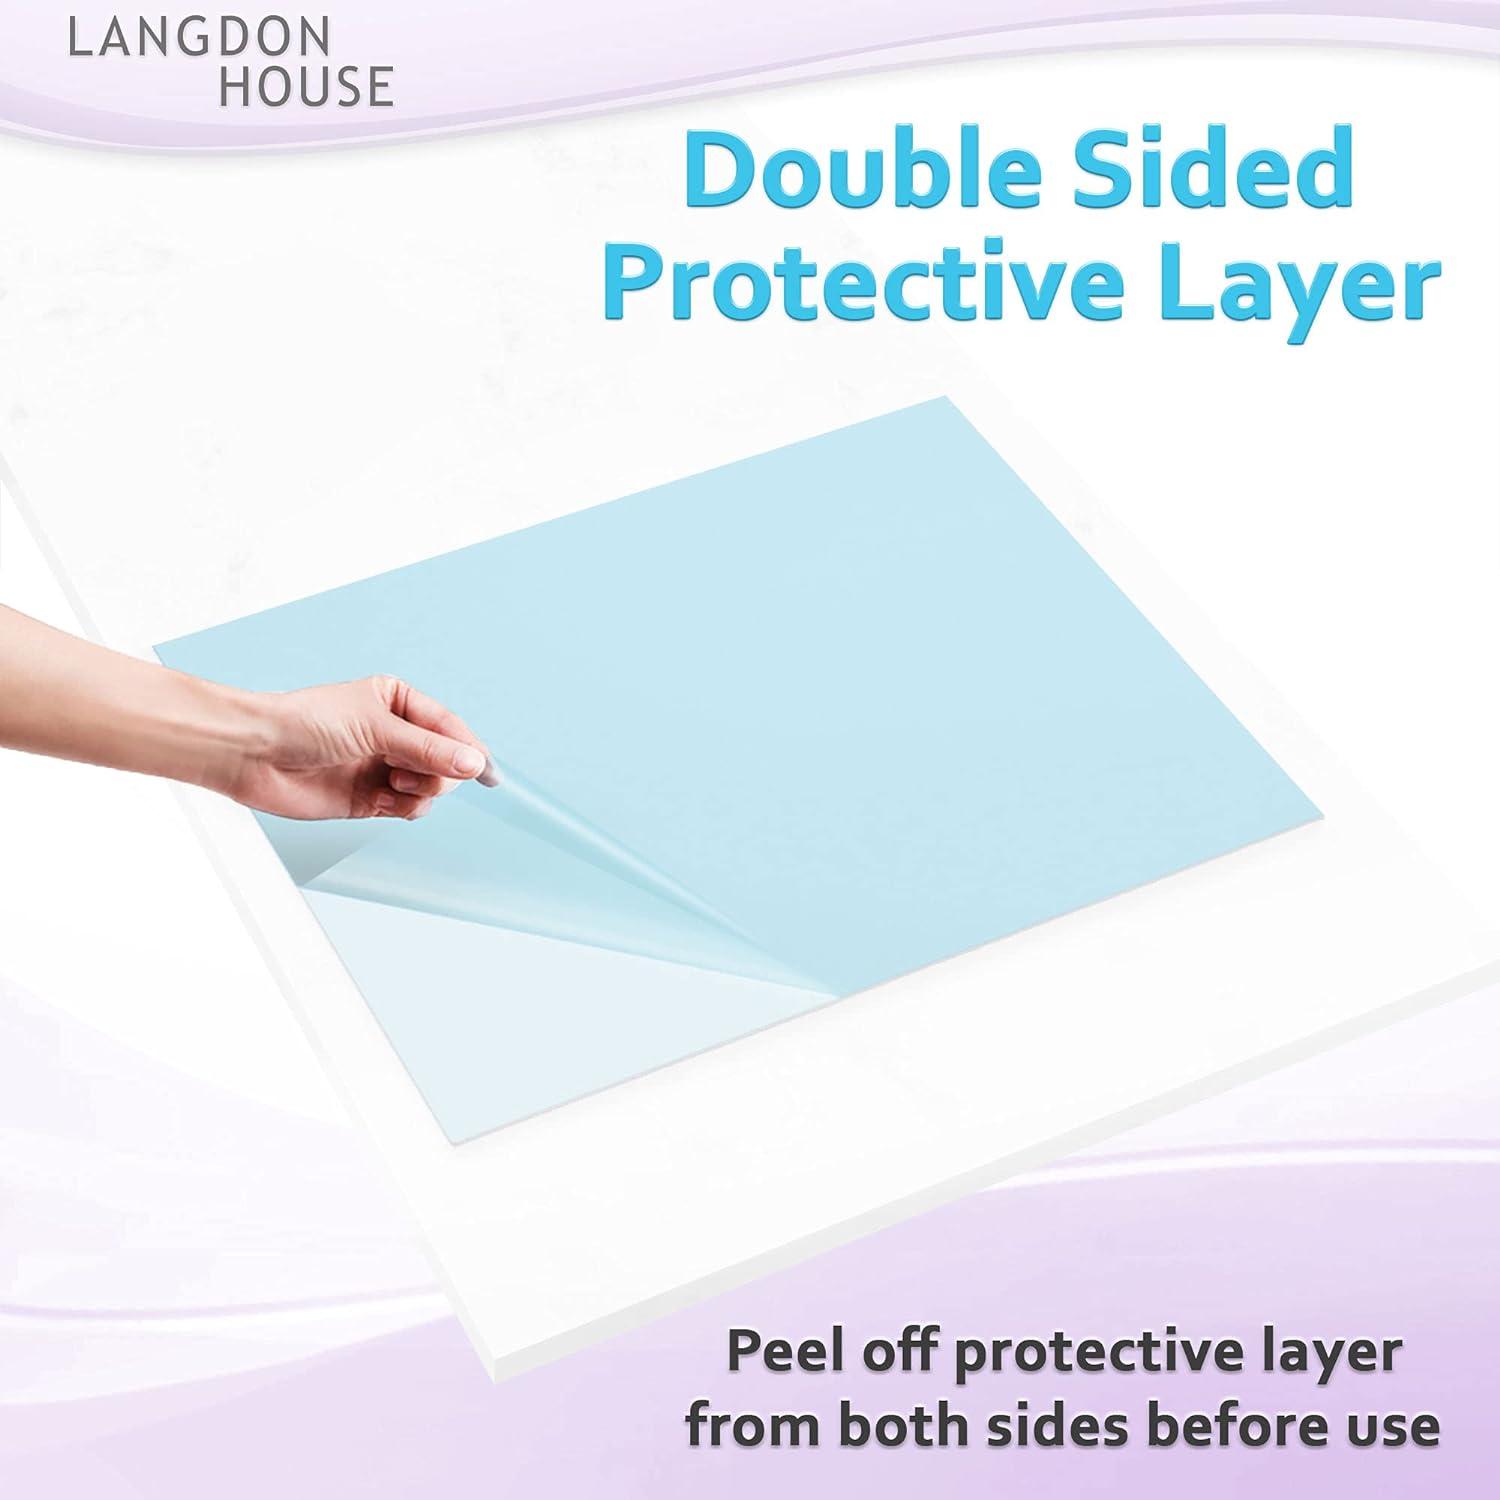 PET Flexible Plastic Glass Sheets (24x36 x 0.03 inch Clear 3 Pack) Thin  Plexi-Glass Sheet for DIY Arts & Crafts Home Projects & Protective Barriers  Easy to Cut by Langdon House 24x36